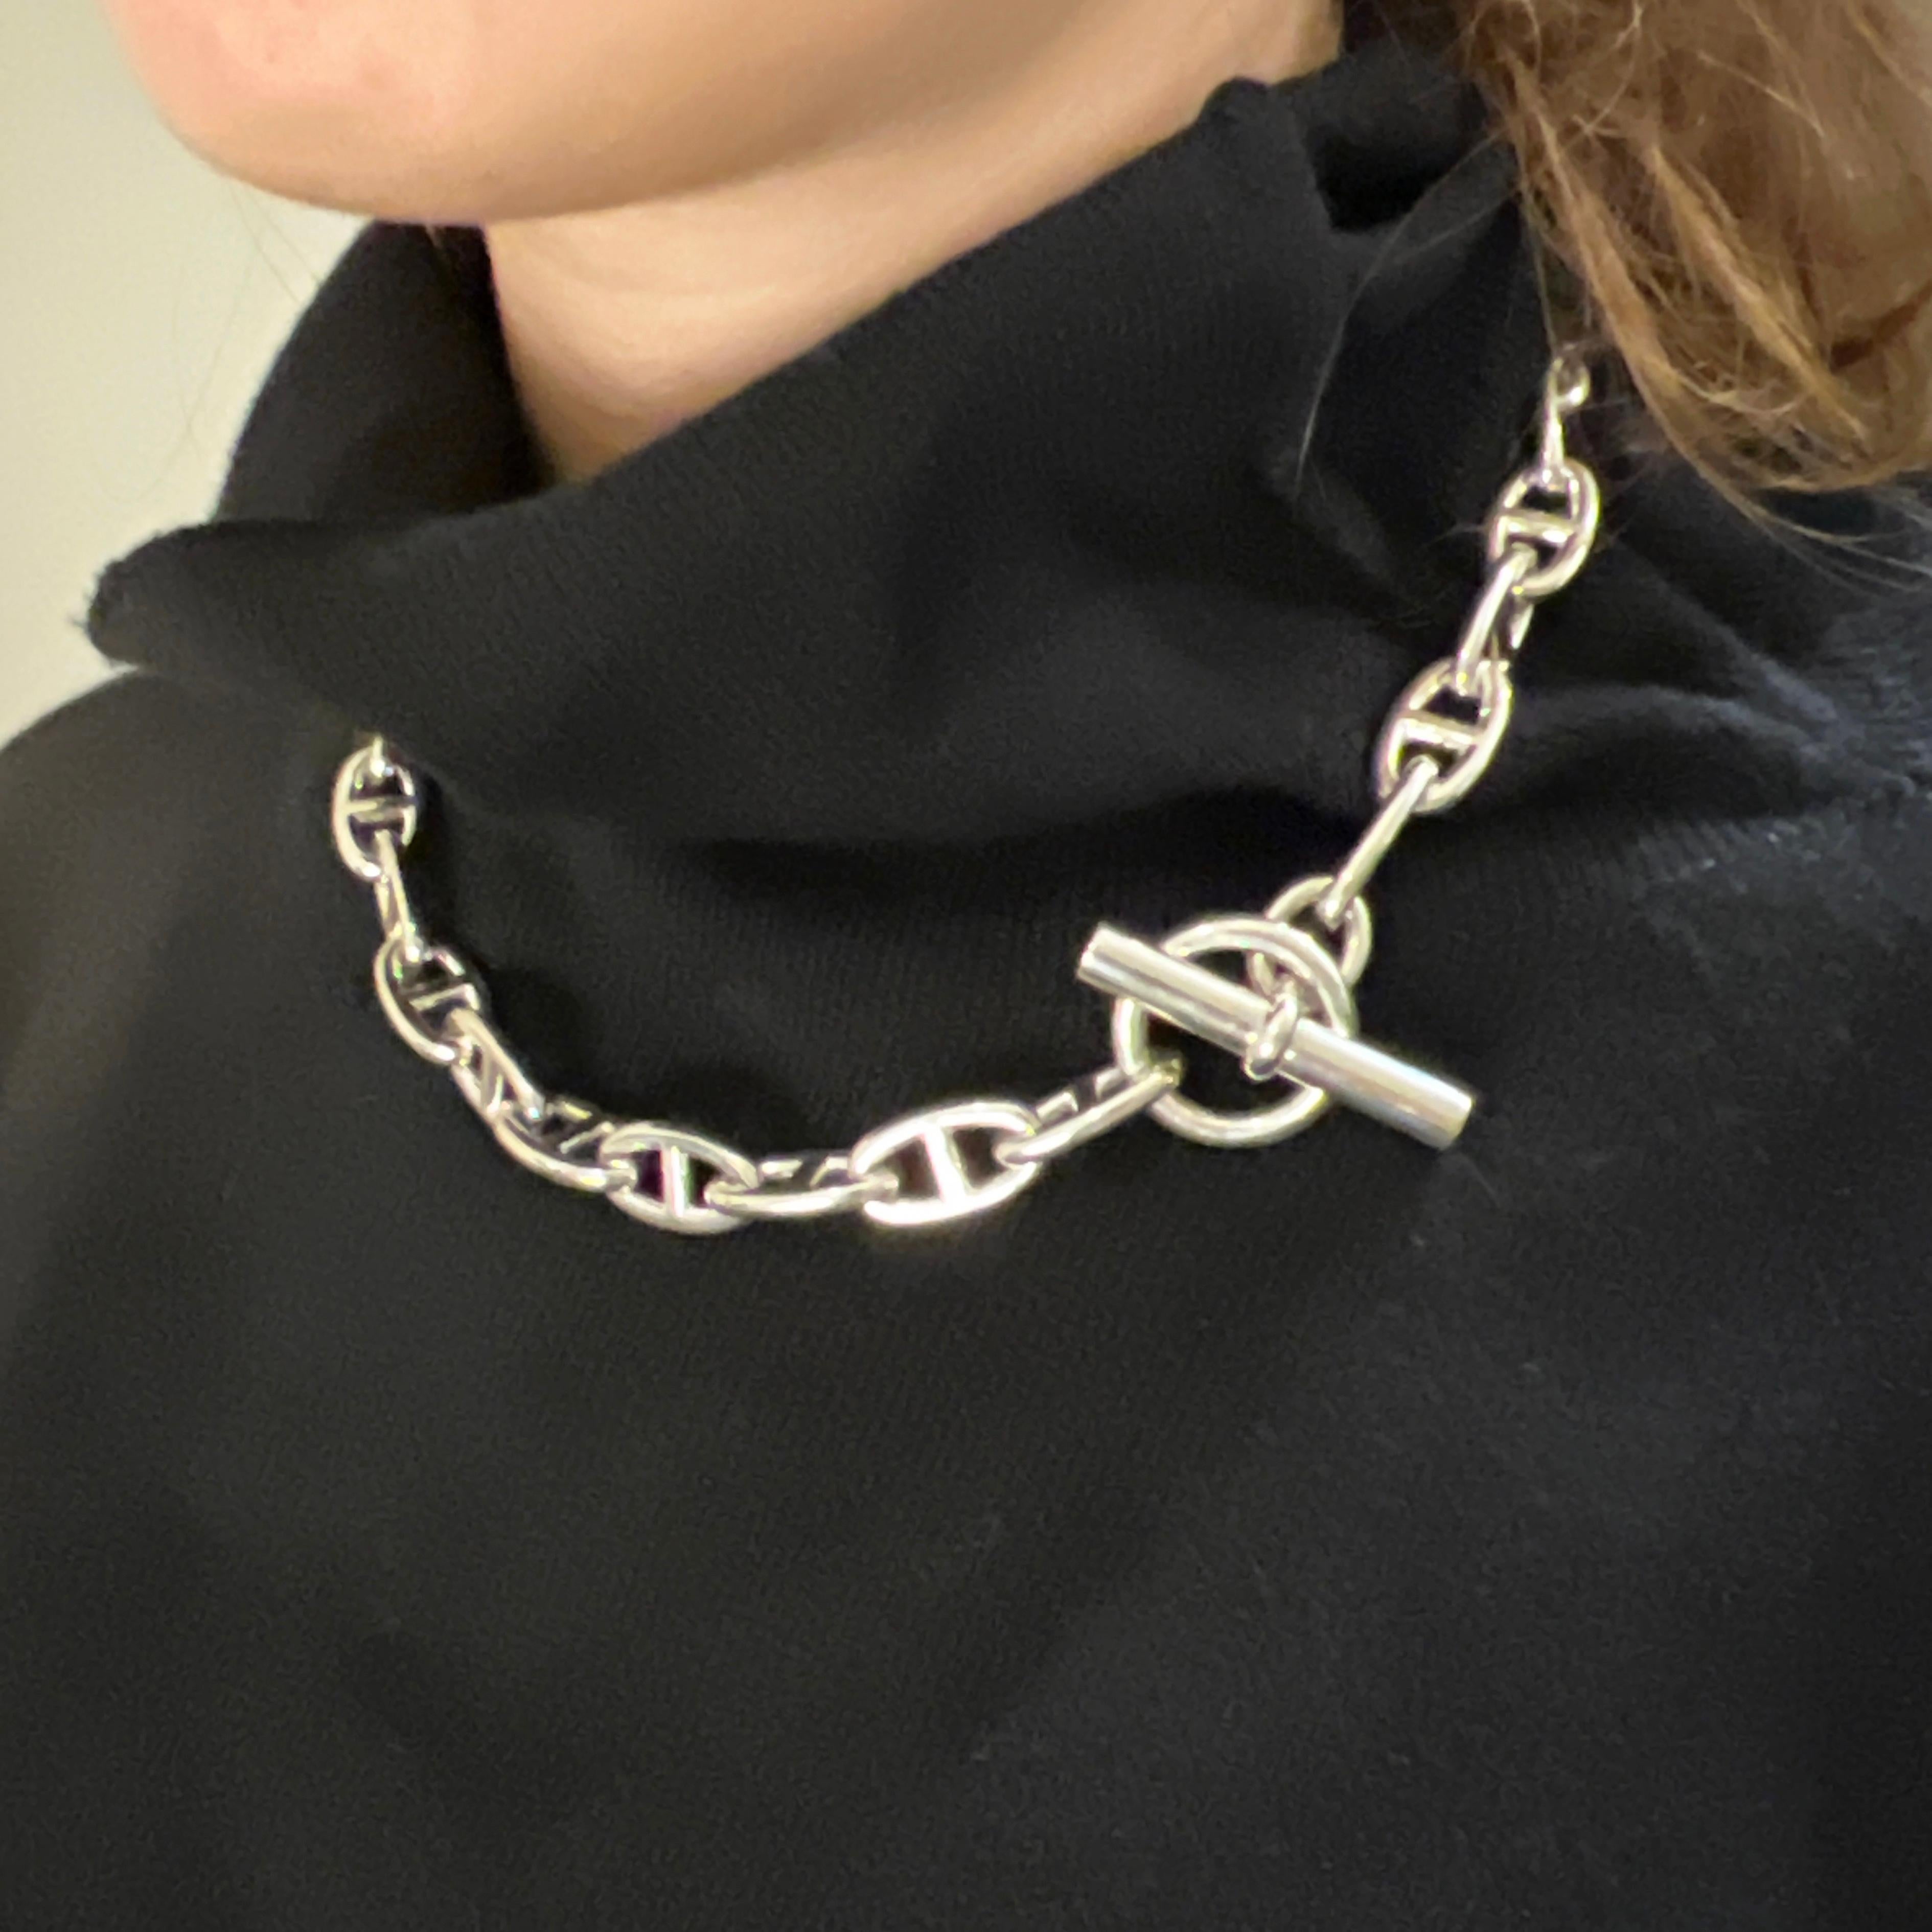 Women's or Men's Hermès Chaine D'ancre Sterling Silver Necklace, circa 1995